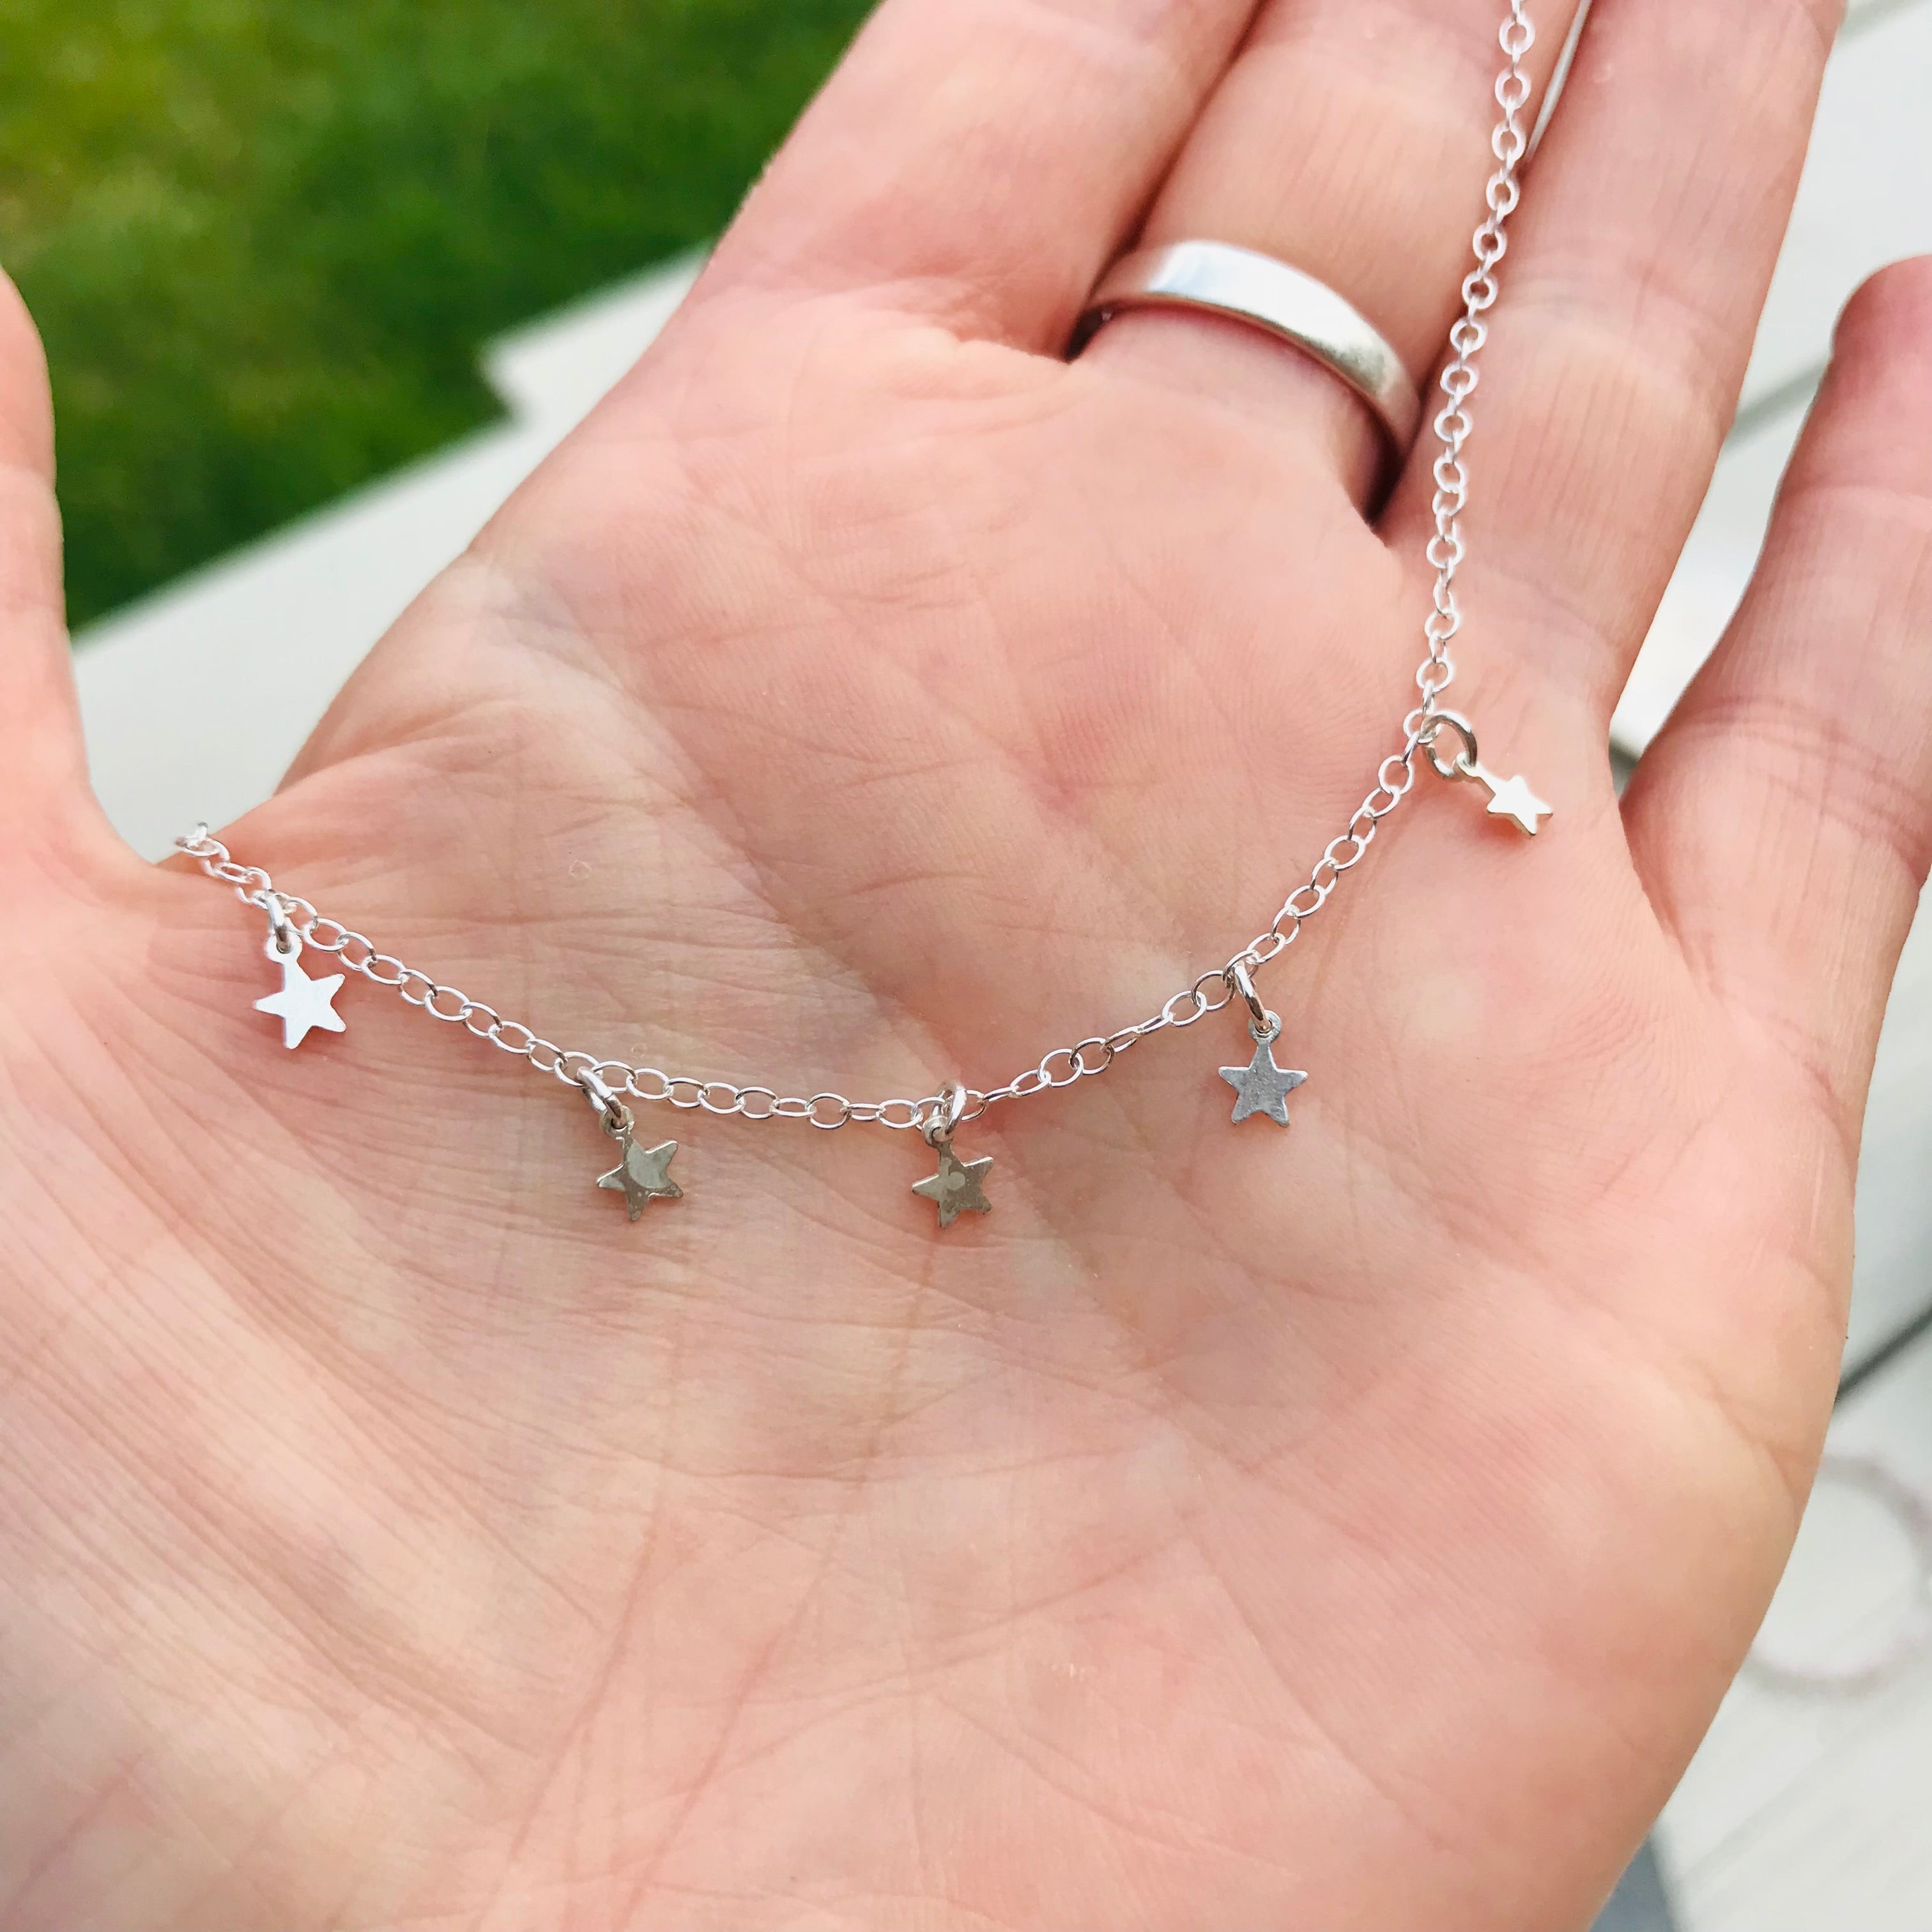 Reach for the Stars - Teeny Tiny Stars Necklace - 18” Sterling Silver Jewellery